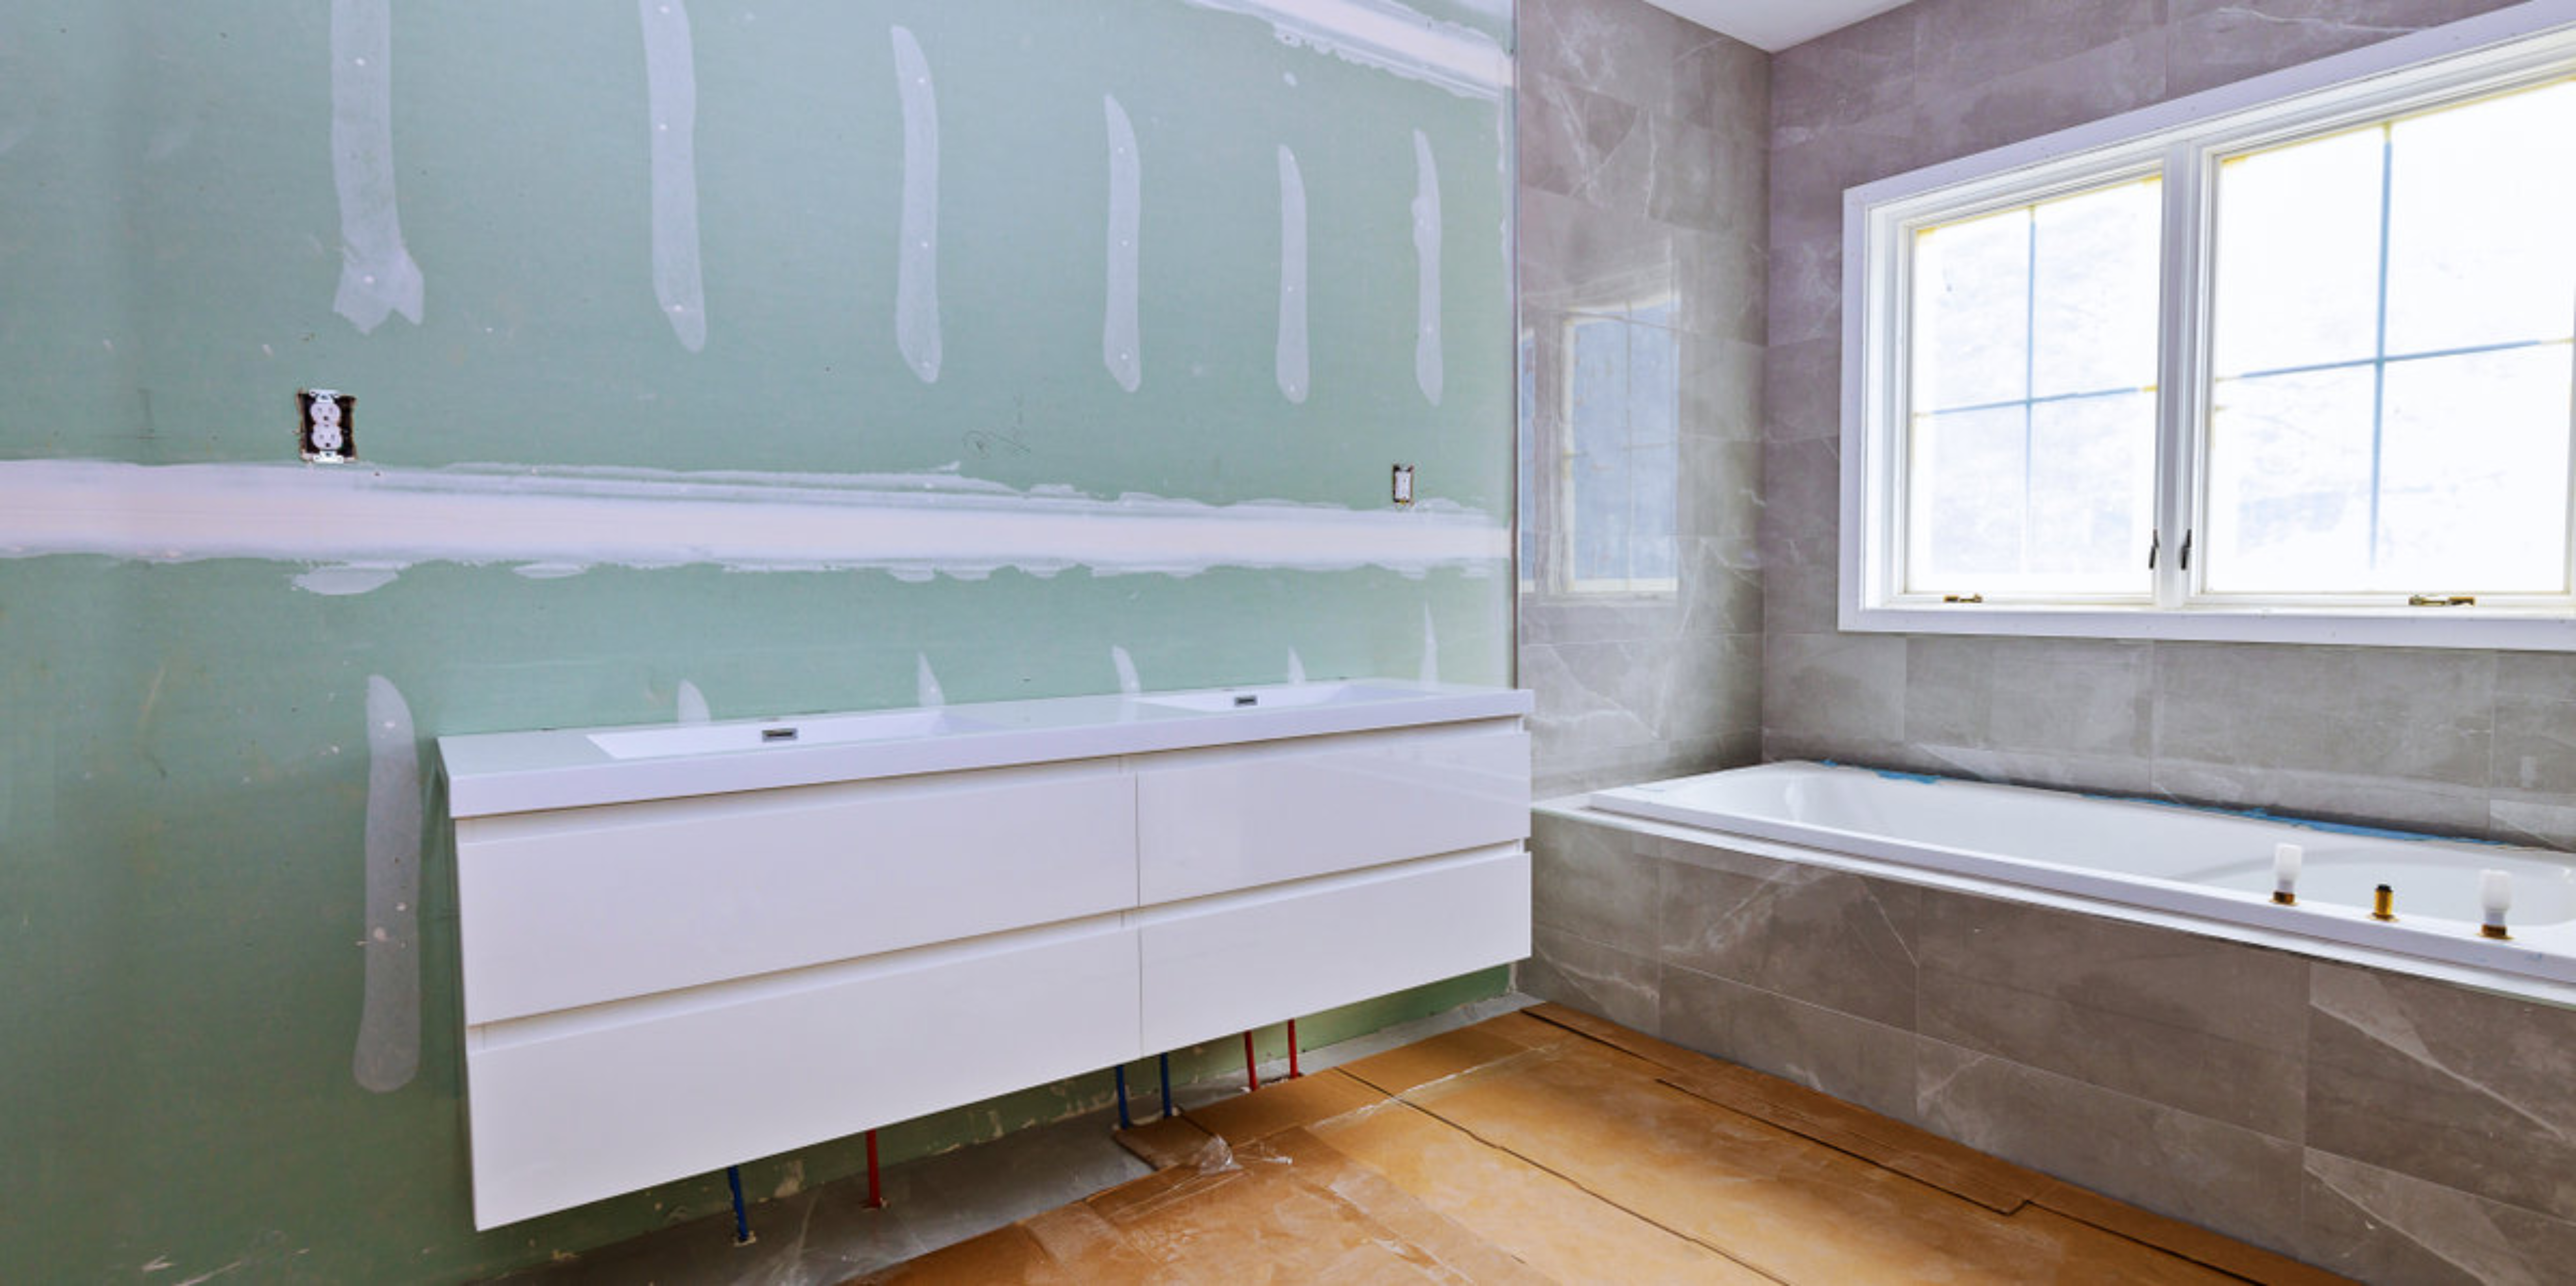 An ongoing bathroom remodeling project, with a storage unit installed on unfinished drywall next to a finished bathtub.